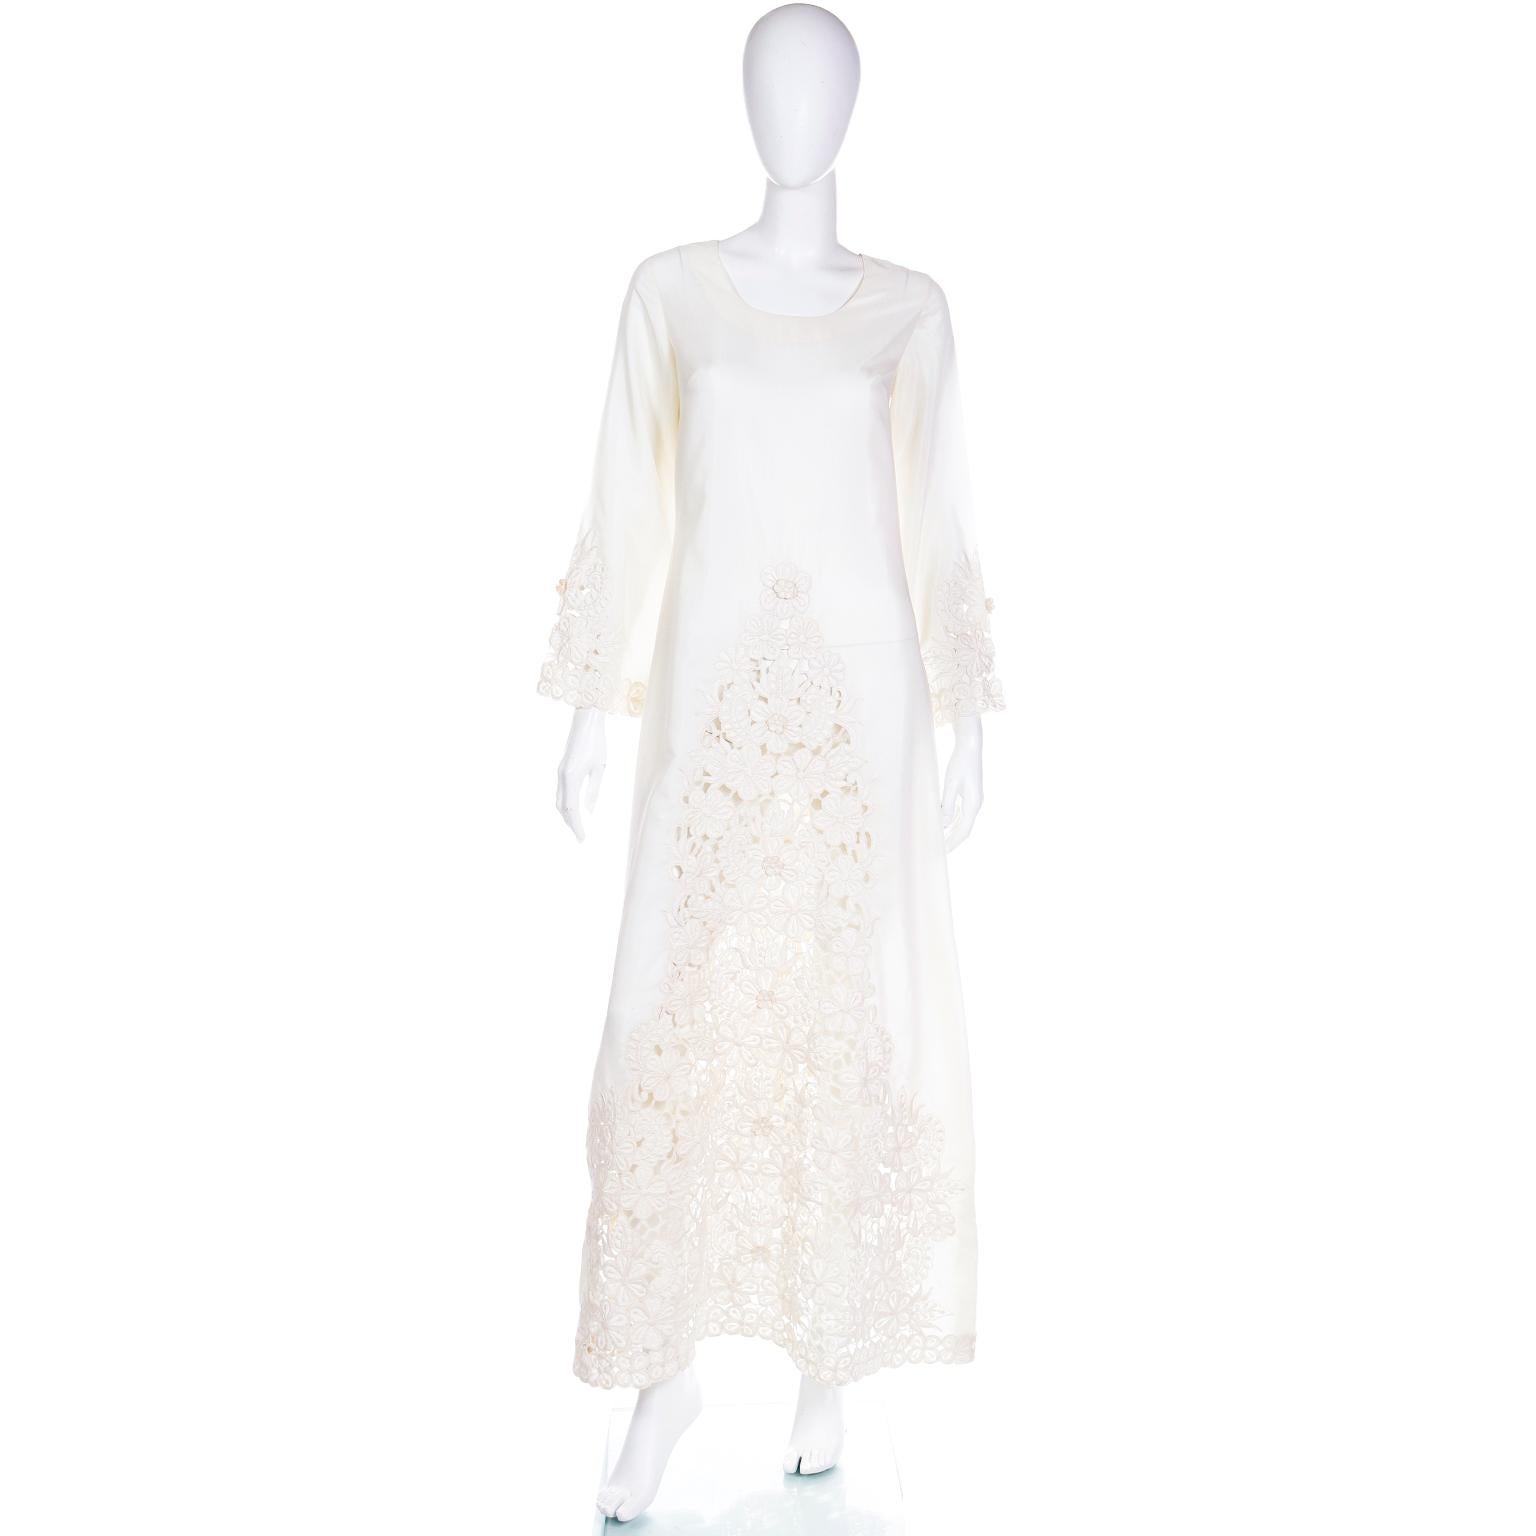 This beautiful vintage ivory cutwork maxi dress was purchased at the shop in The Shangri La Hotel in Singapore in the 1970's. The fabric feels like a nylon blend and we are obsessed with the fabulous guipure lace found on the front and at the